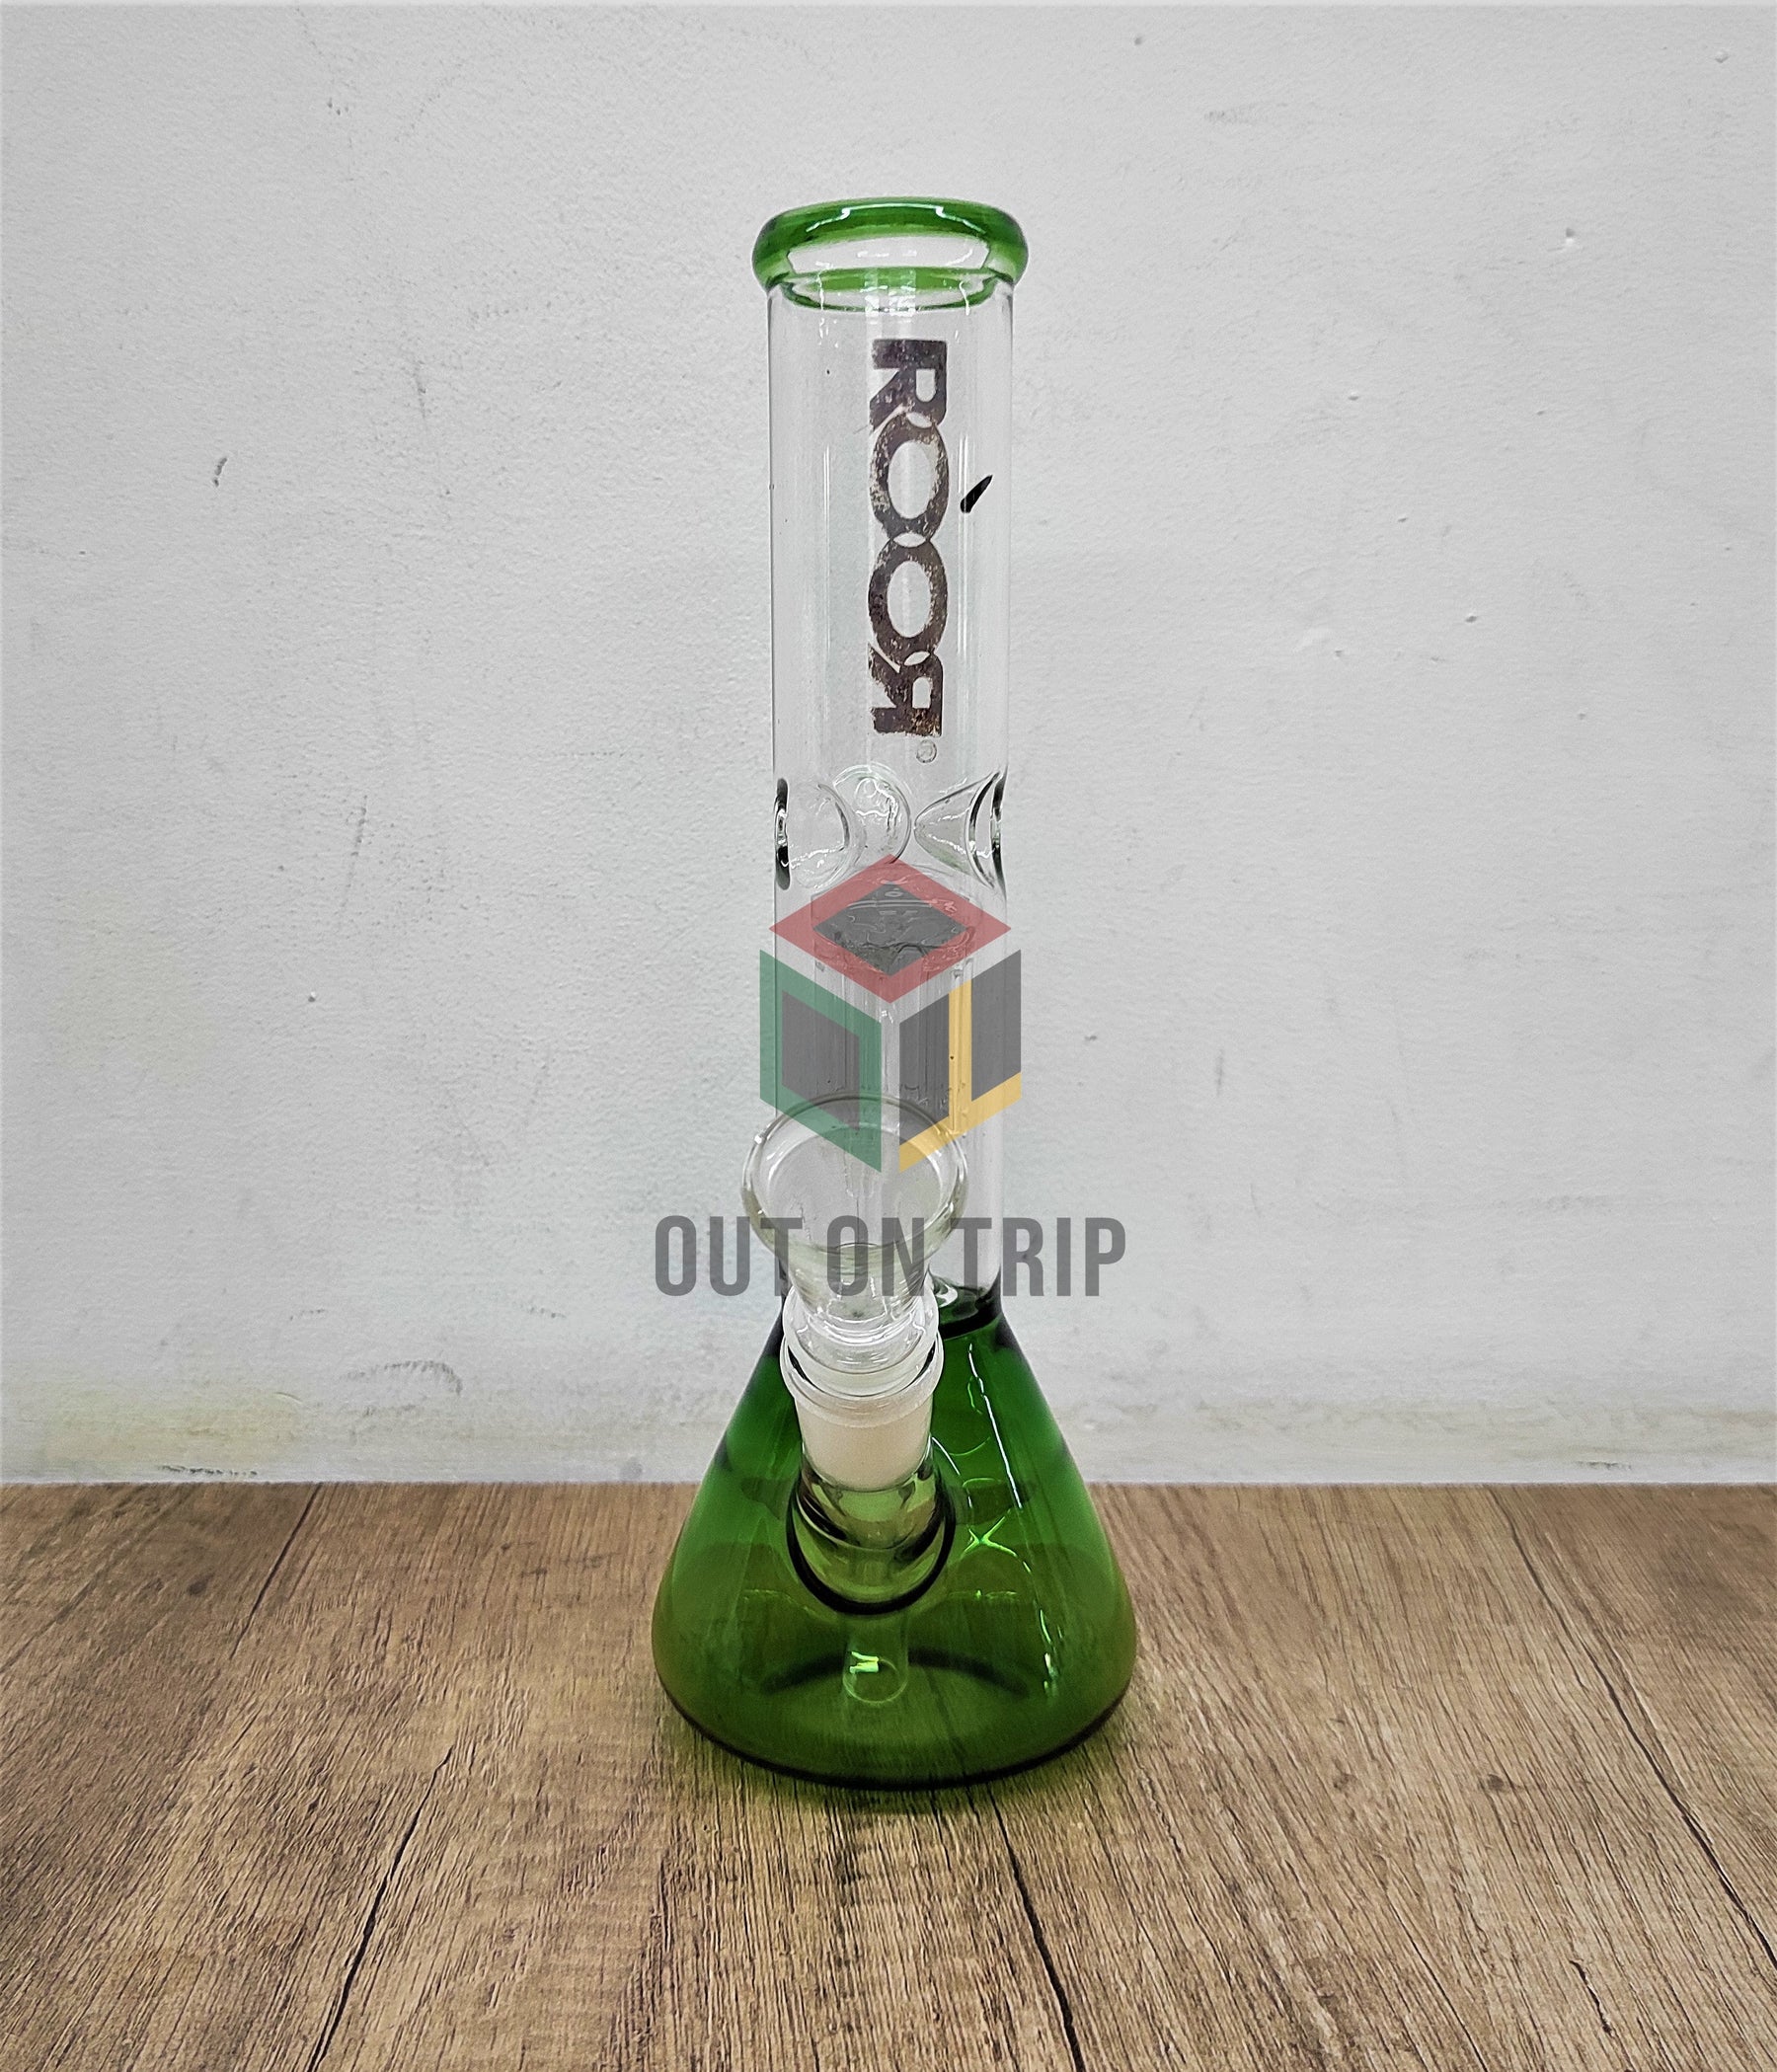 10 Ich Conical Flask Assorted Colors Bong with Tree Percolator and Ice Catcher